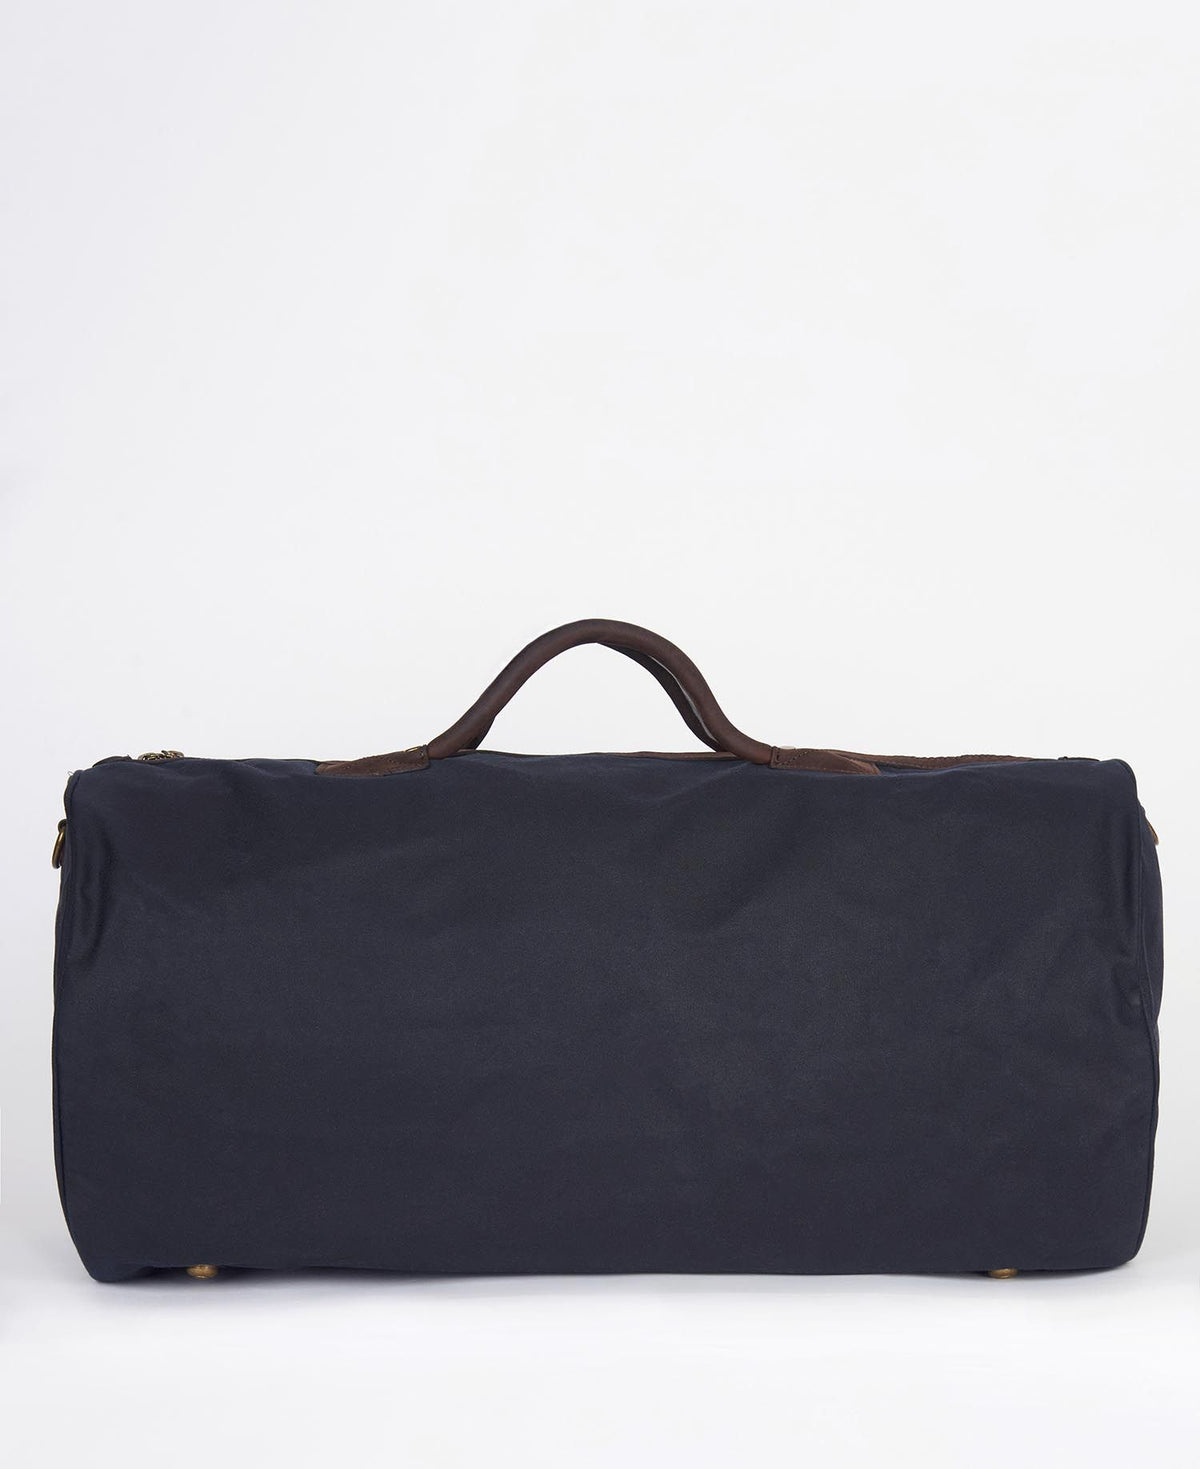 Barbour Mens Wax Essential Holdall, 07, Uba0017, Navy